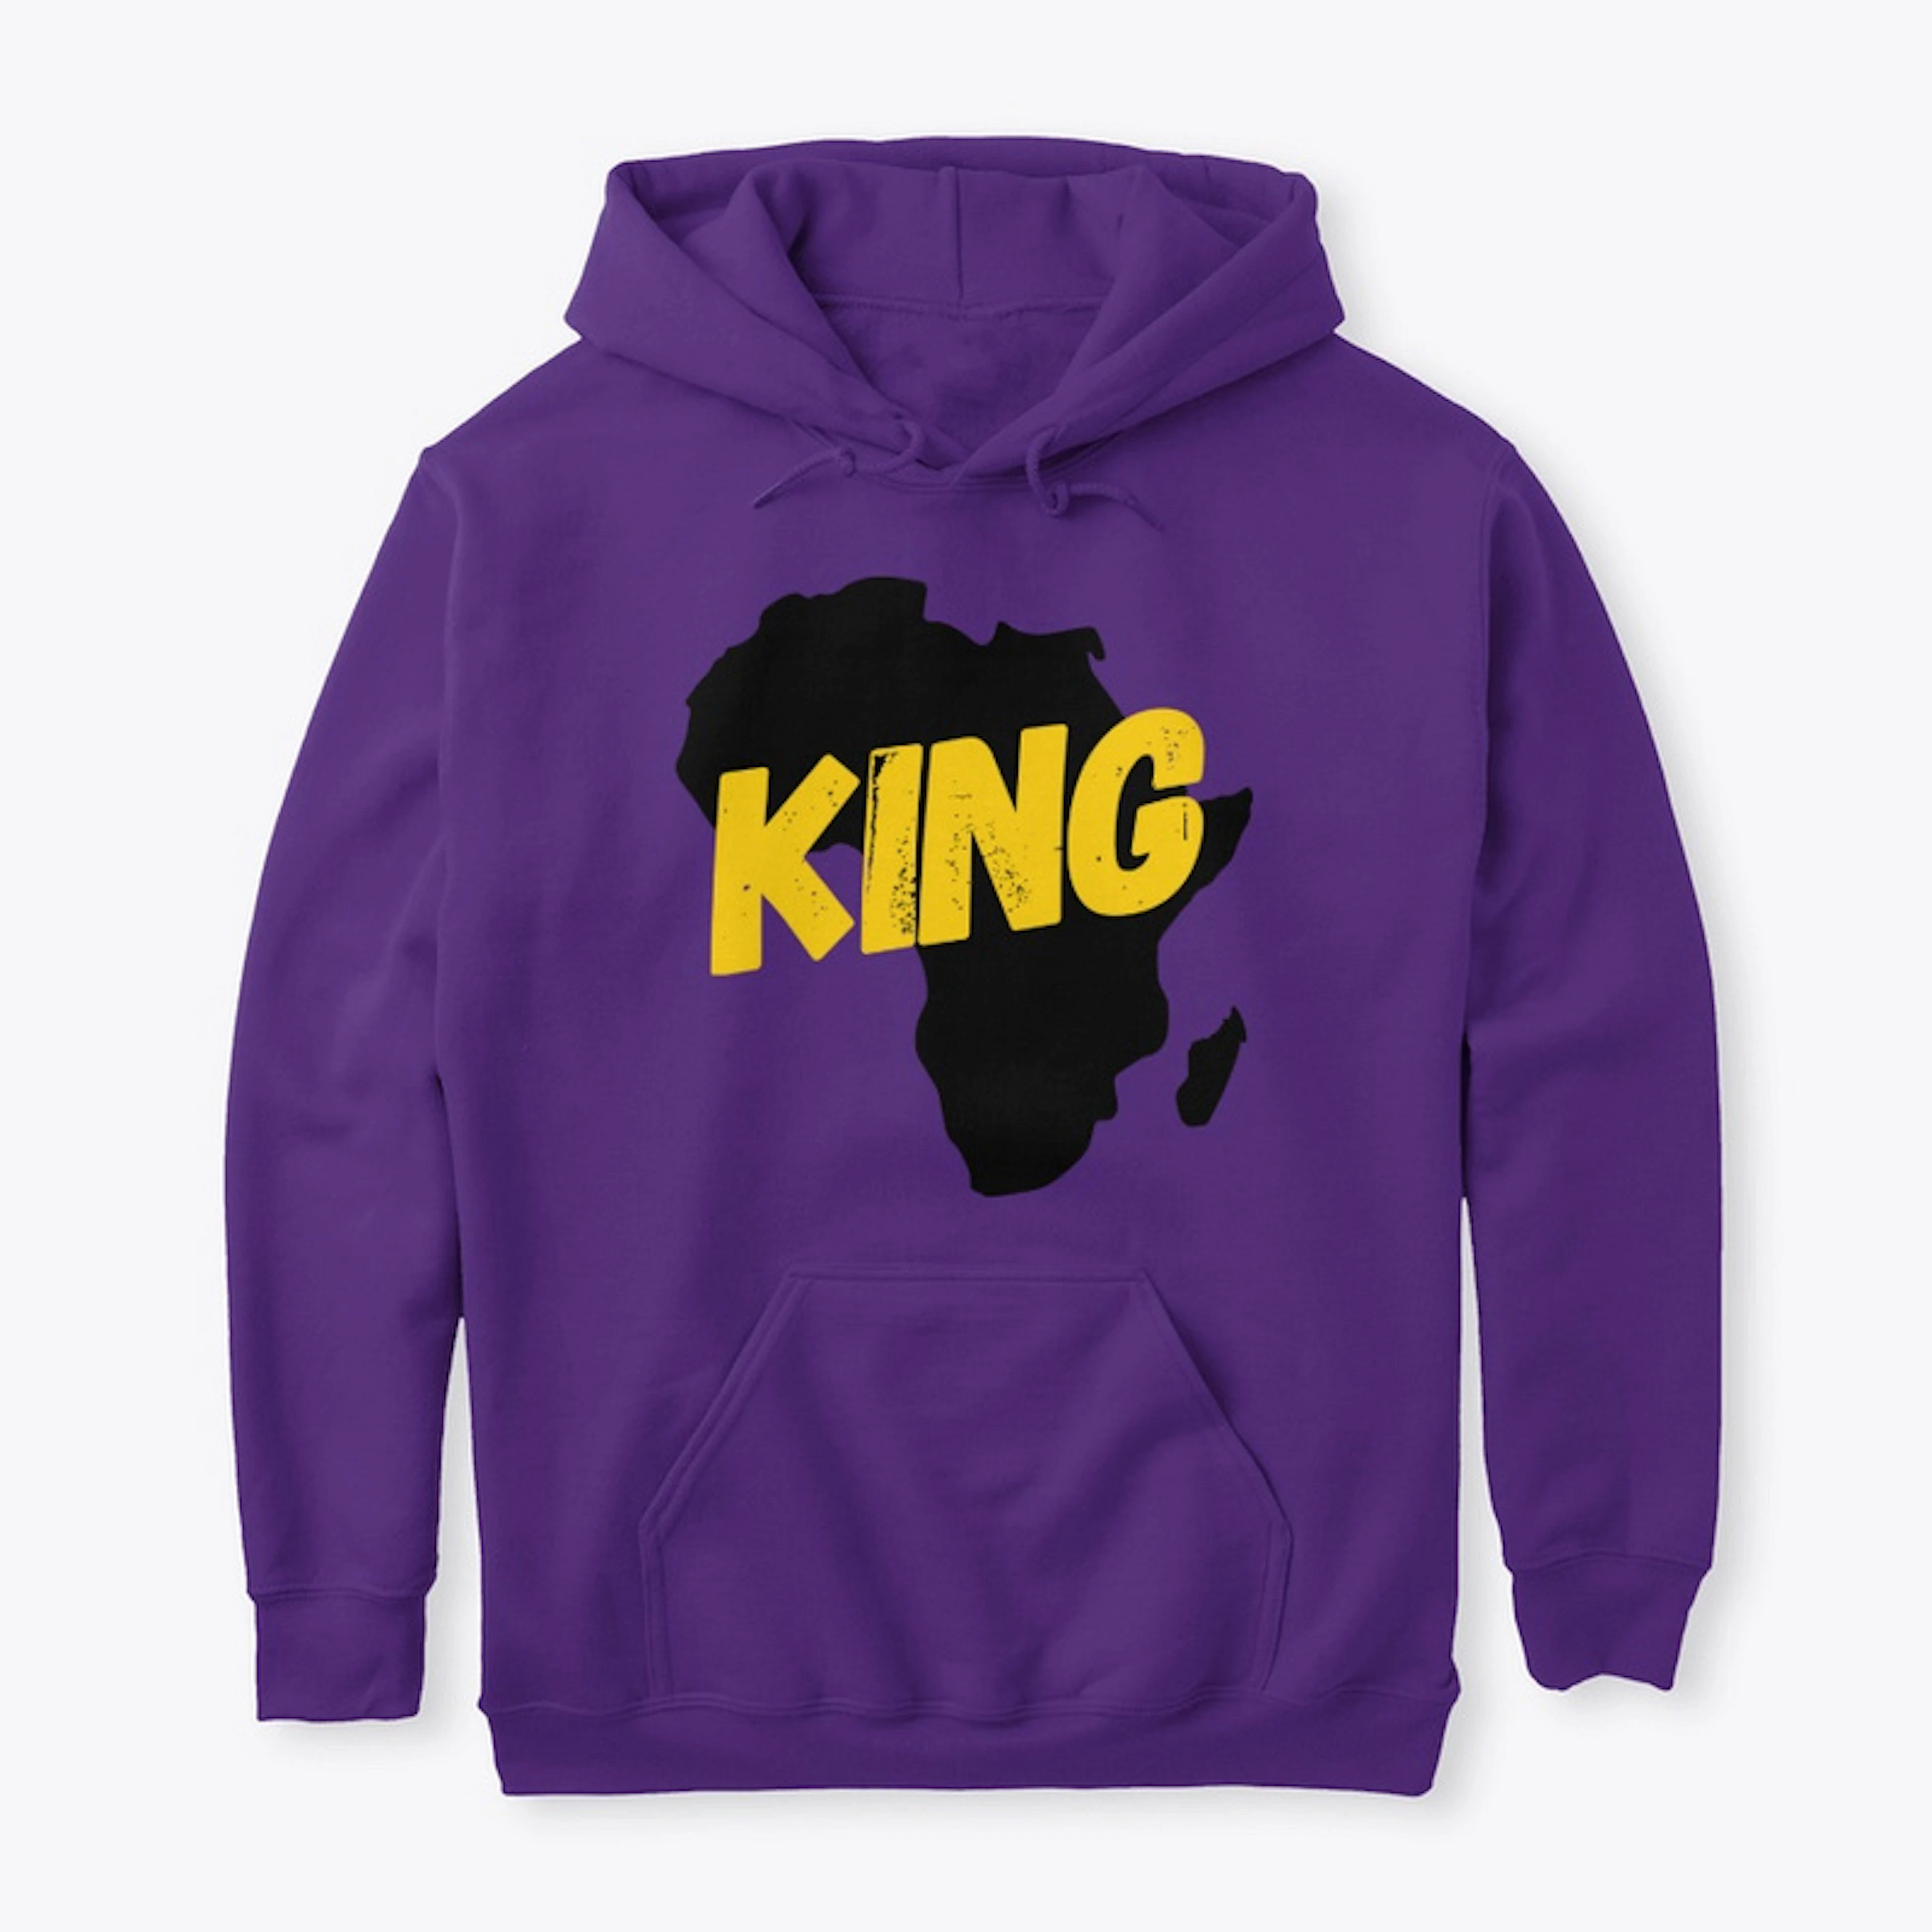 African King